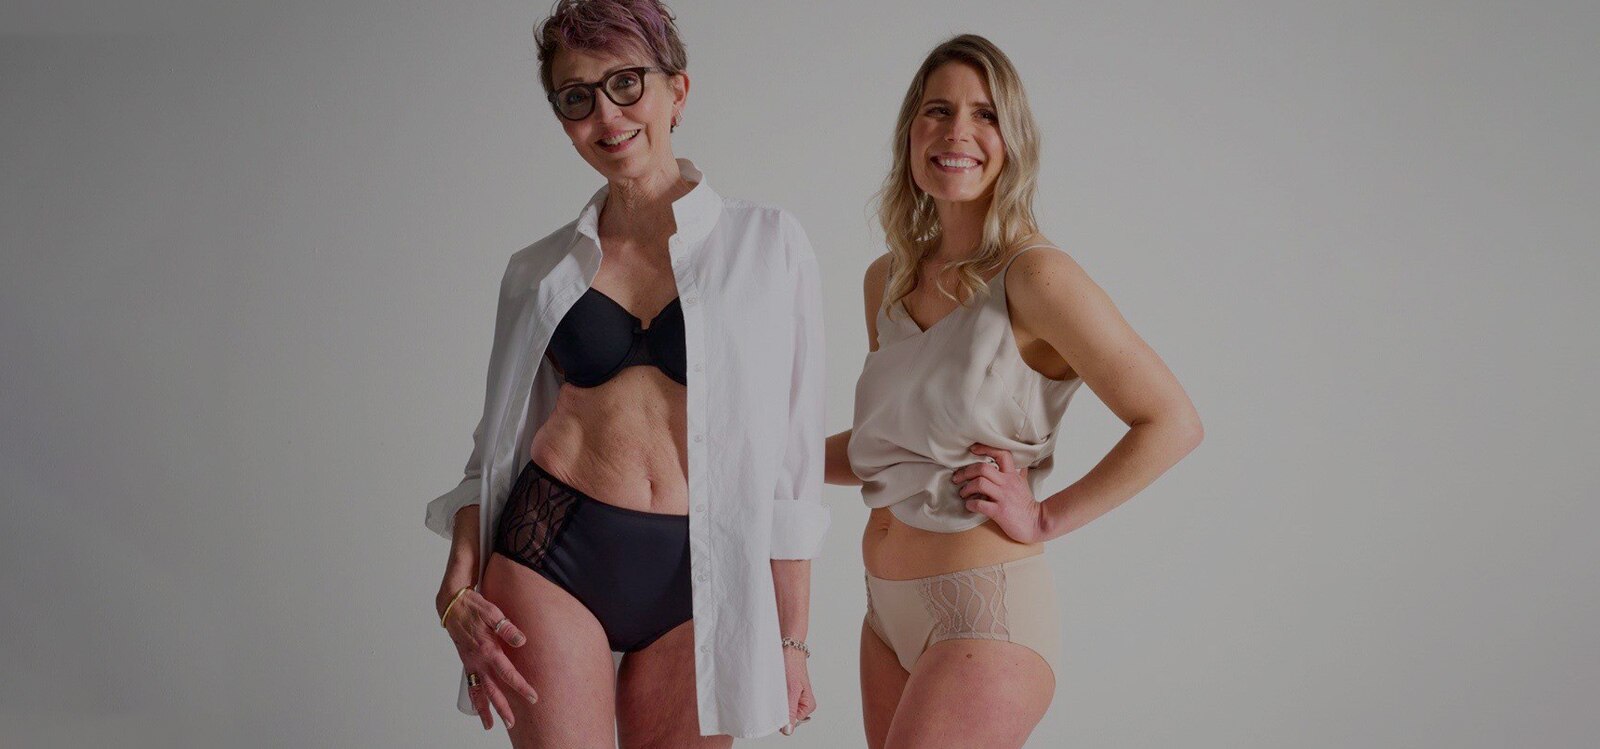 Two women standing next to each other, smiling, wearing TENA Silhouette Washable underwear in black and beige. 